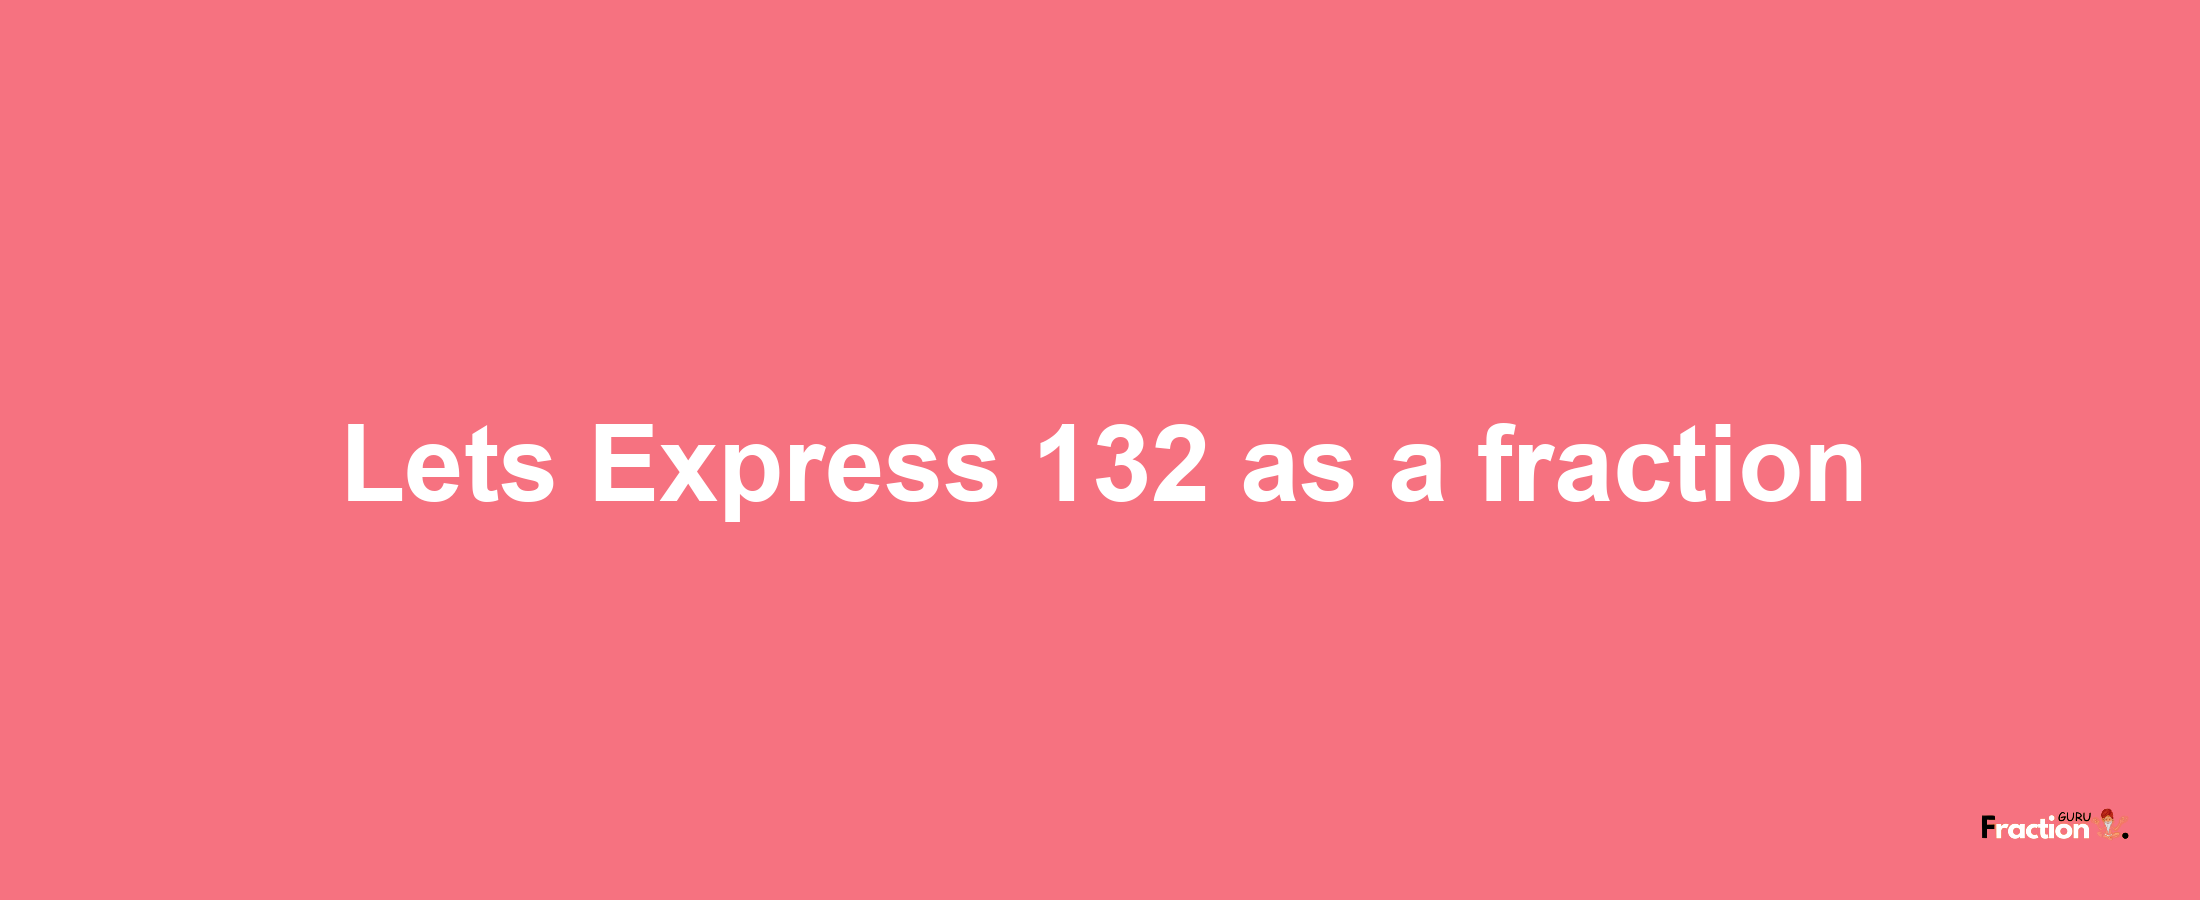 Lets Express 132 as afraction